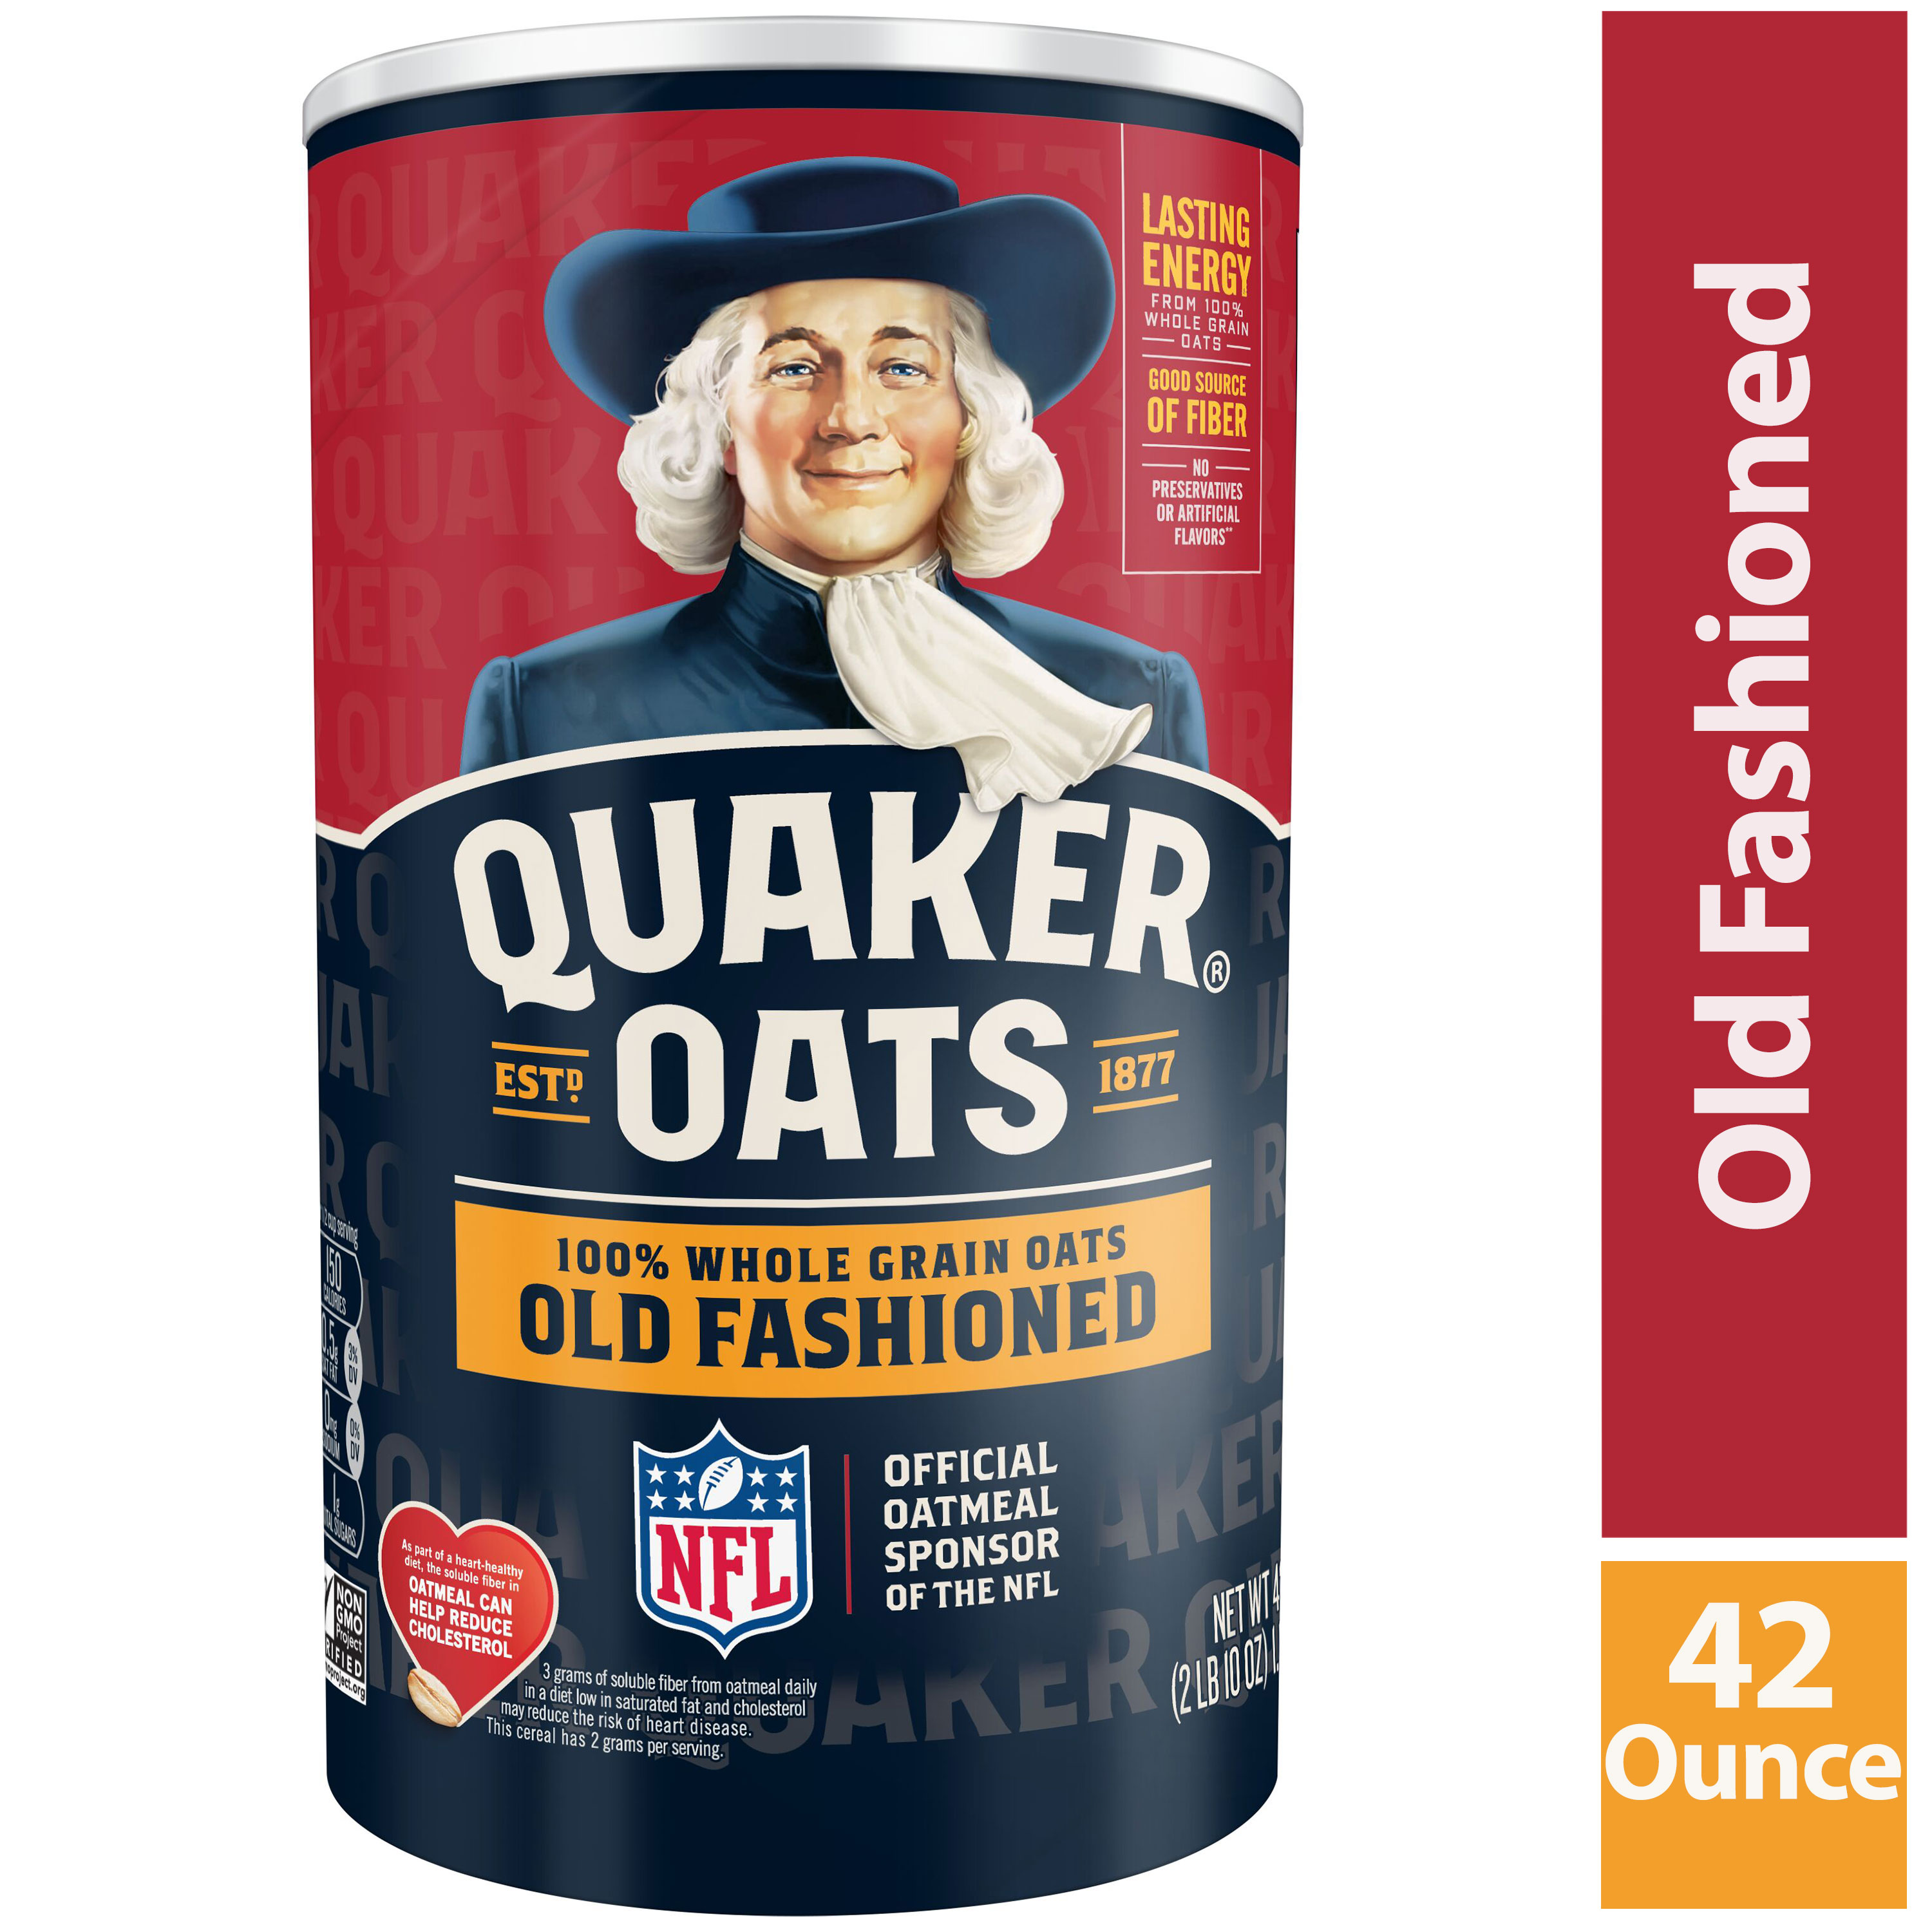 Quaker, Old Fashioned Oatmeal, Whole Grain, Cook on Stovetop or Microwave, 42 oz Canister - image 1 of 7